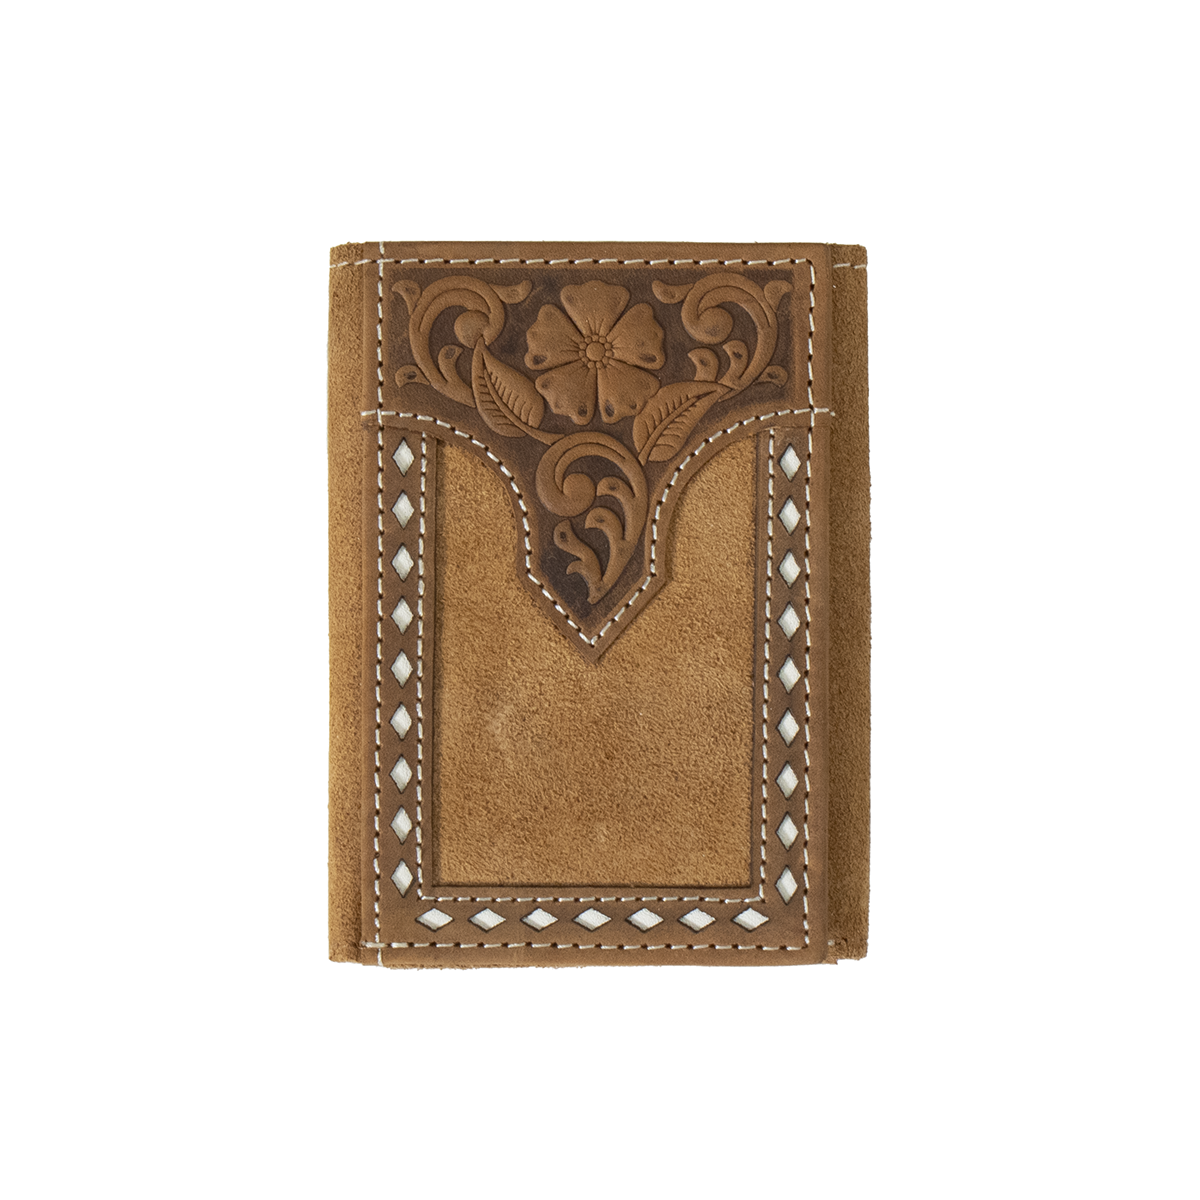 NOCONA TRIFOLD WALLET FLORAL EMBOSSED WHITE BUCK LACING TAN